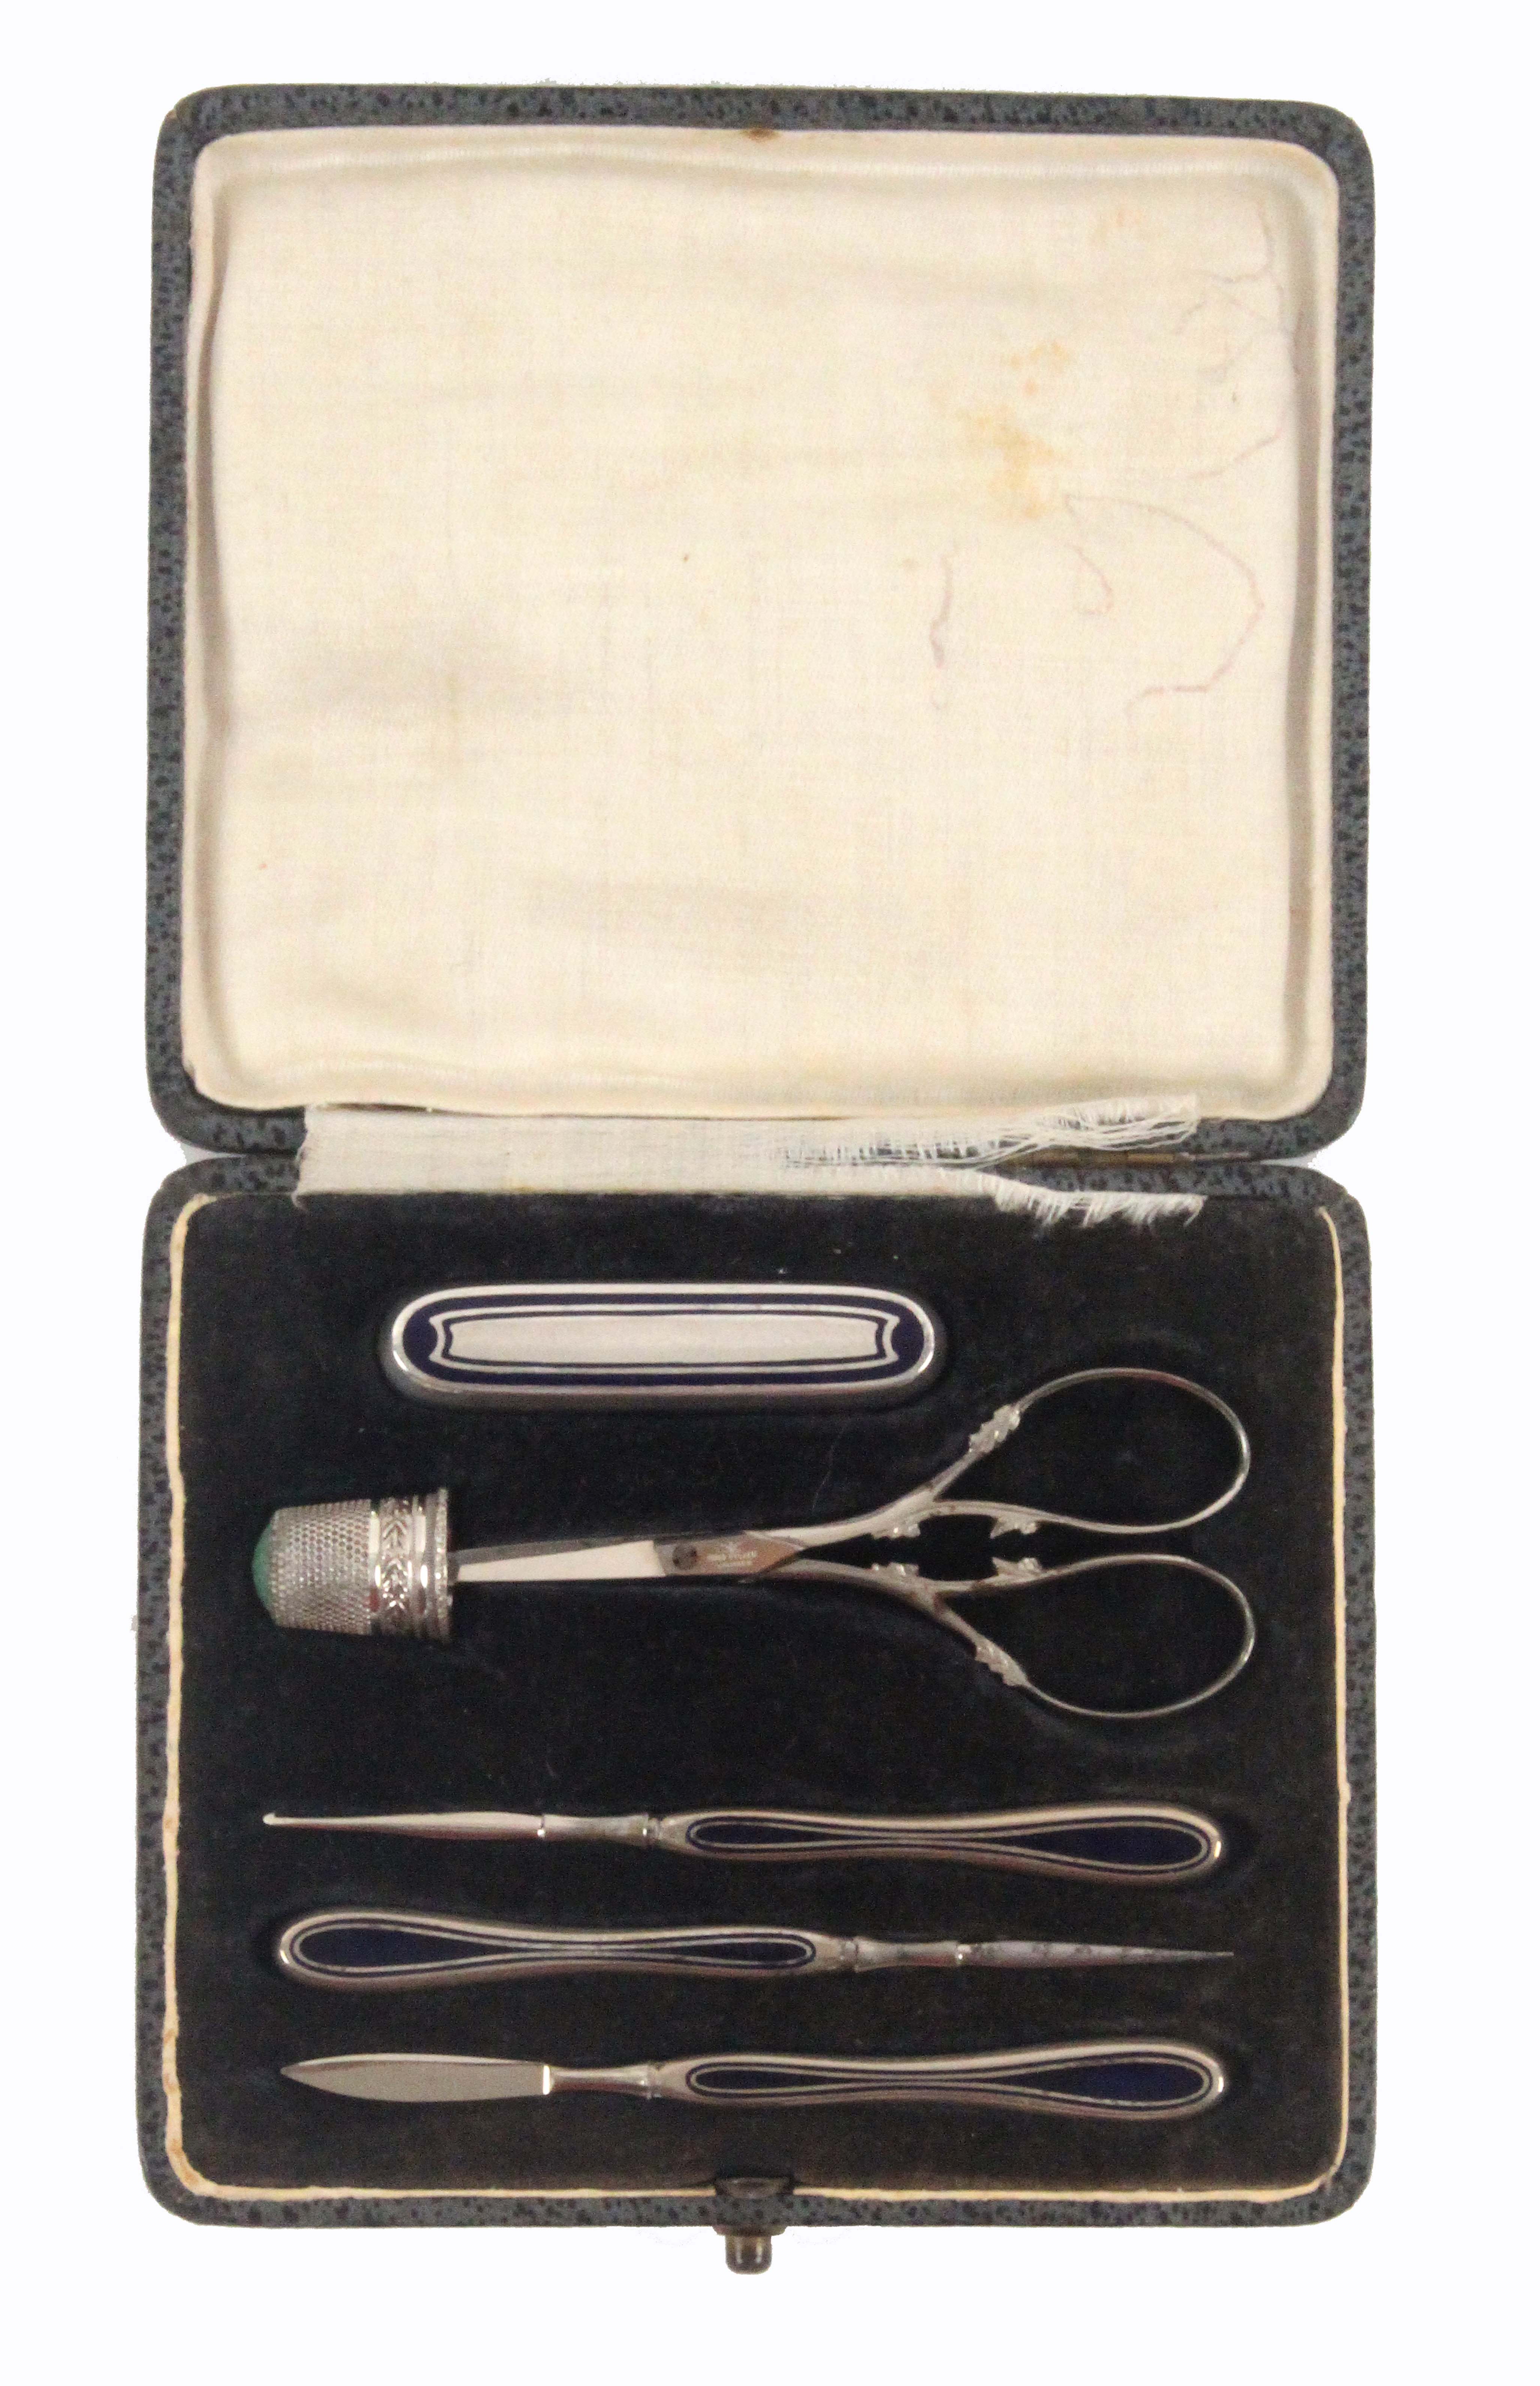 A six piece German white metal sewing set, contained in a leatherette rectangular case, the flush